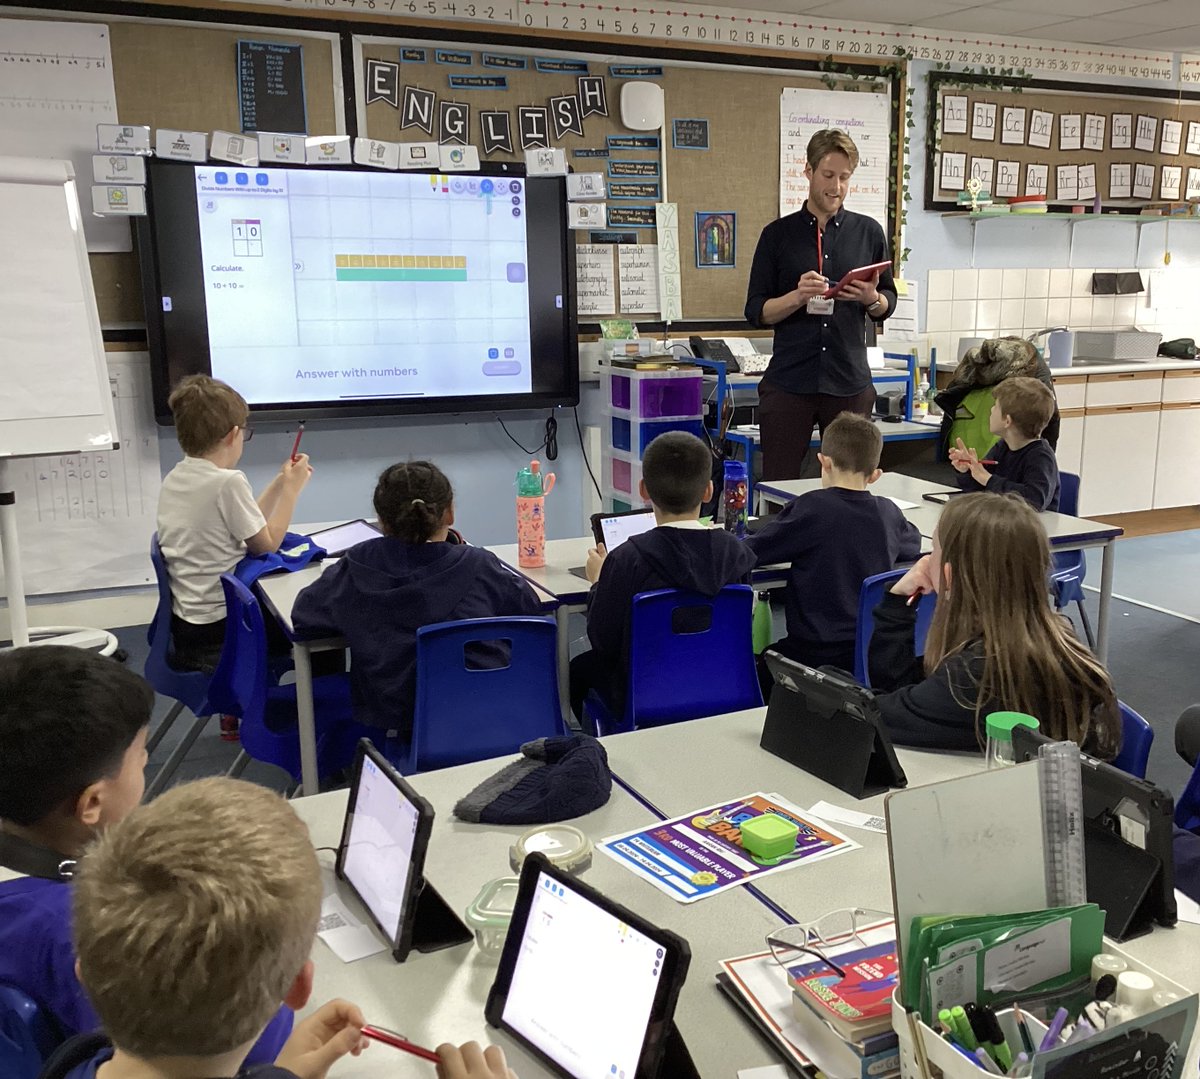 Year 4 had a special visitor, Daniel, from Magma math to demonstrate the Magma app. They had a great time learning how to use the new app, which supported them with their current maths learning of dividing a 2 digit number by 10.@MagmaMath @KentBexleyRTC